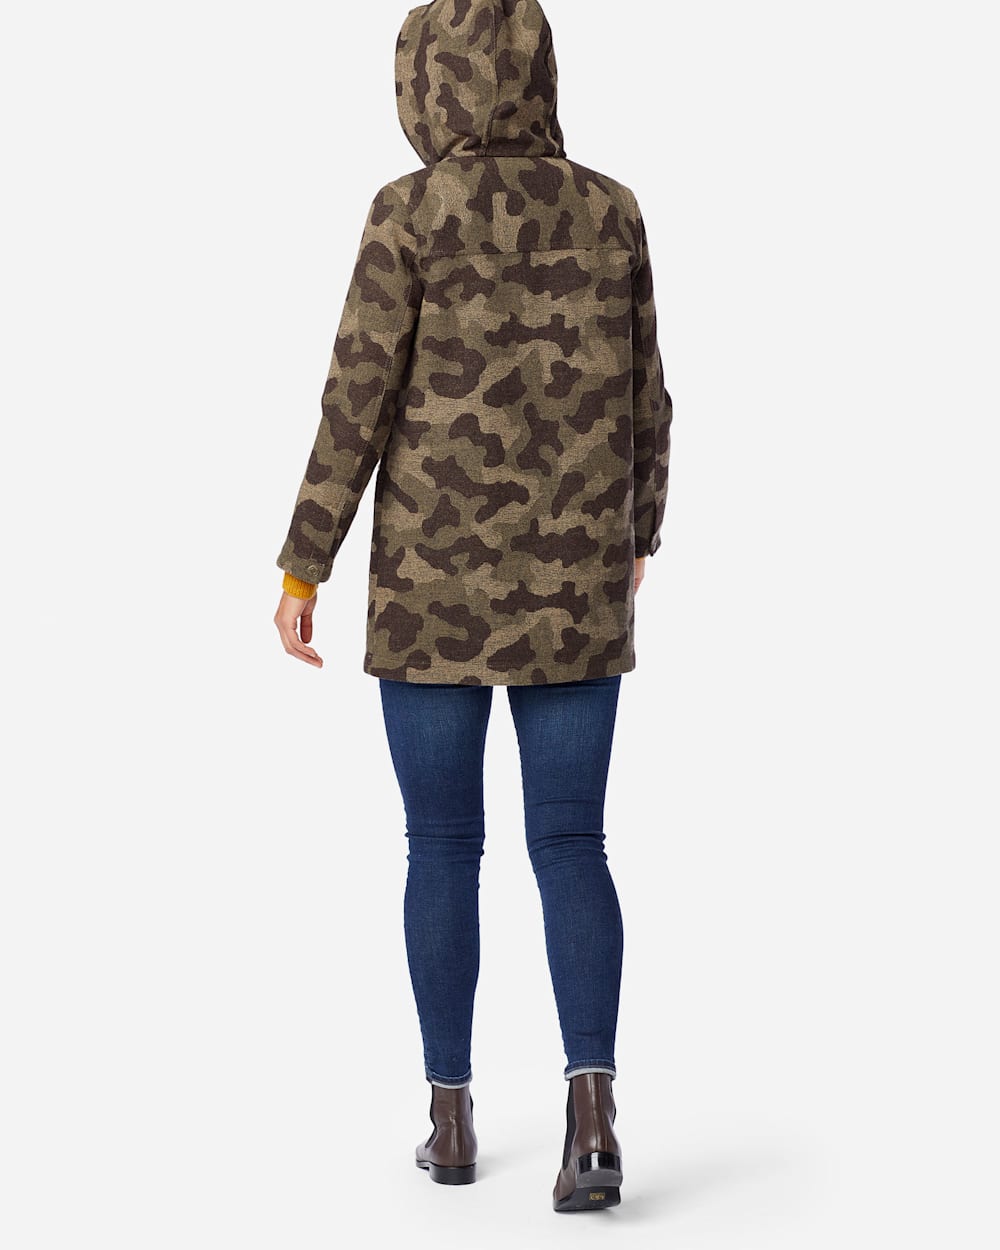 ALTERNATE VIEW OF WOMEN'S WOOL PARKA IN CAMO image number 3